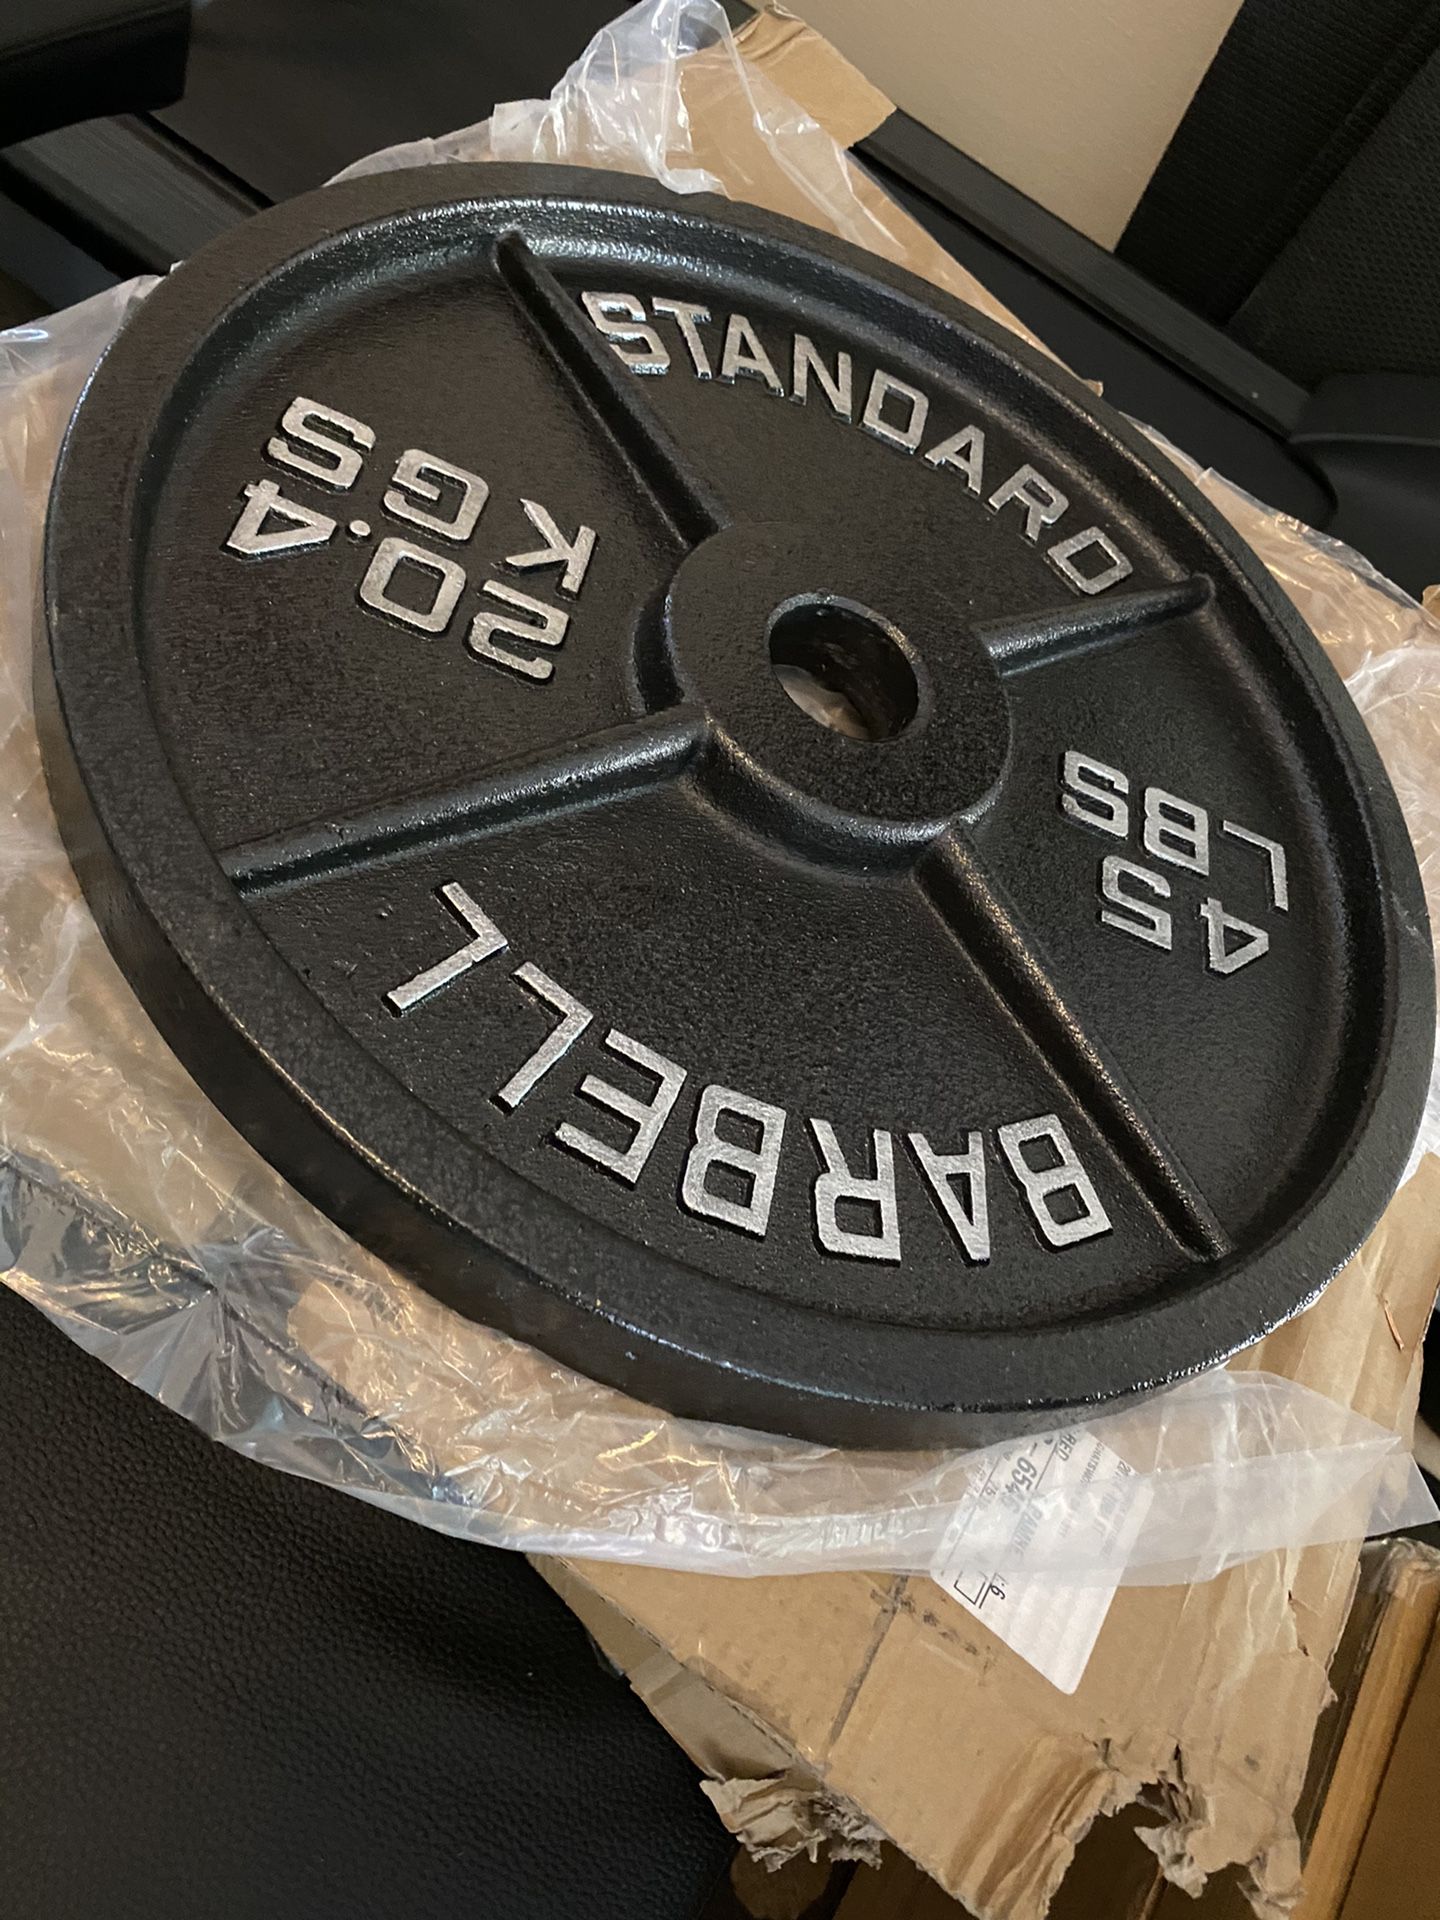 45lb Rogue Fitness Olympic Cast Iron Plates (pair)